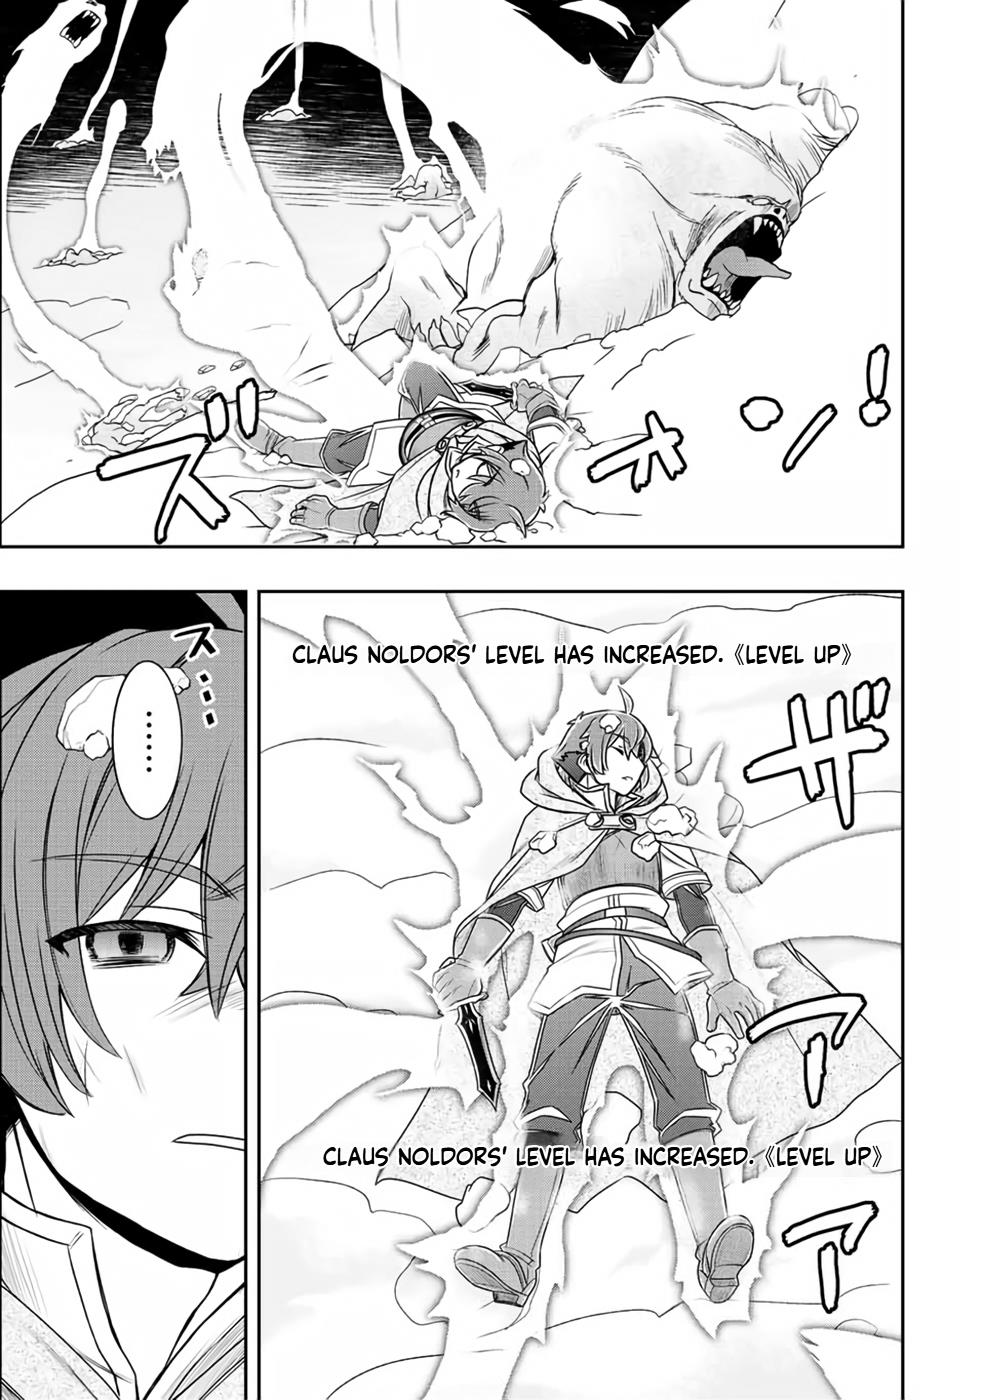 The Useless Skill [Auto Mode] Has Been Awakened ~Huh, Guild's Scout, Didn't You Say I Wasn't Needed Anymore?~ - Page 3